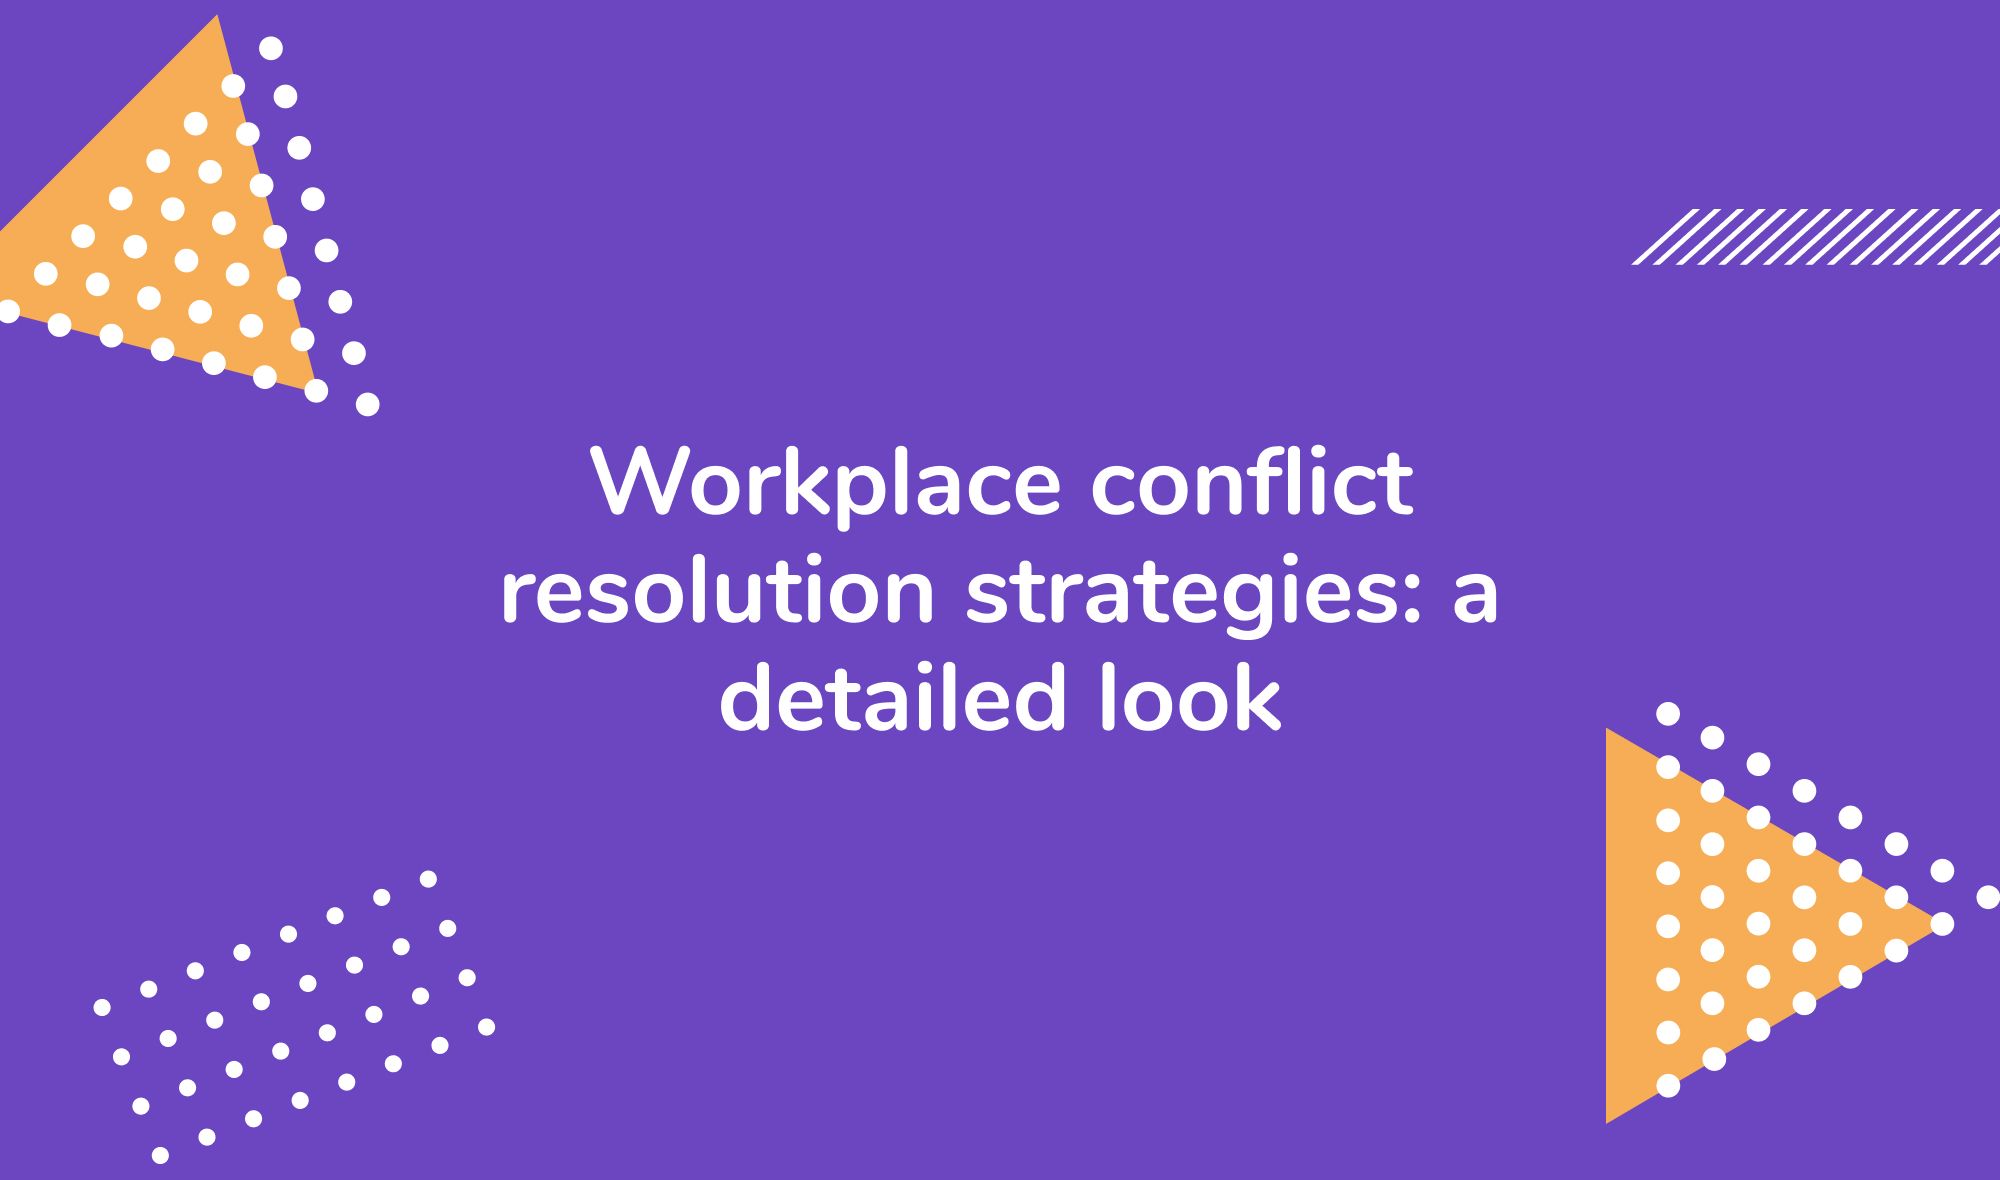 Workplace conflict resolution strategies: a detailed look